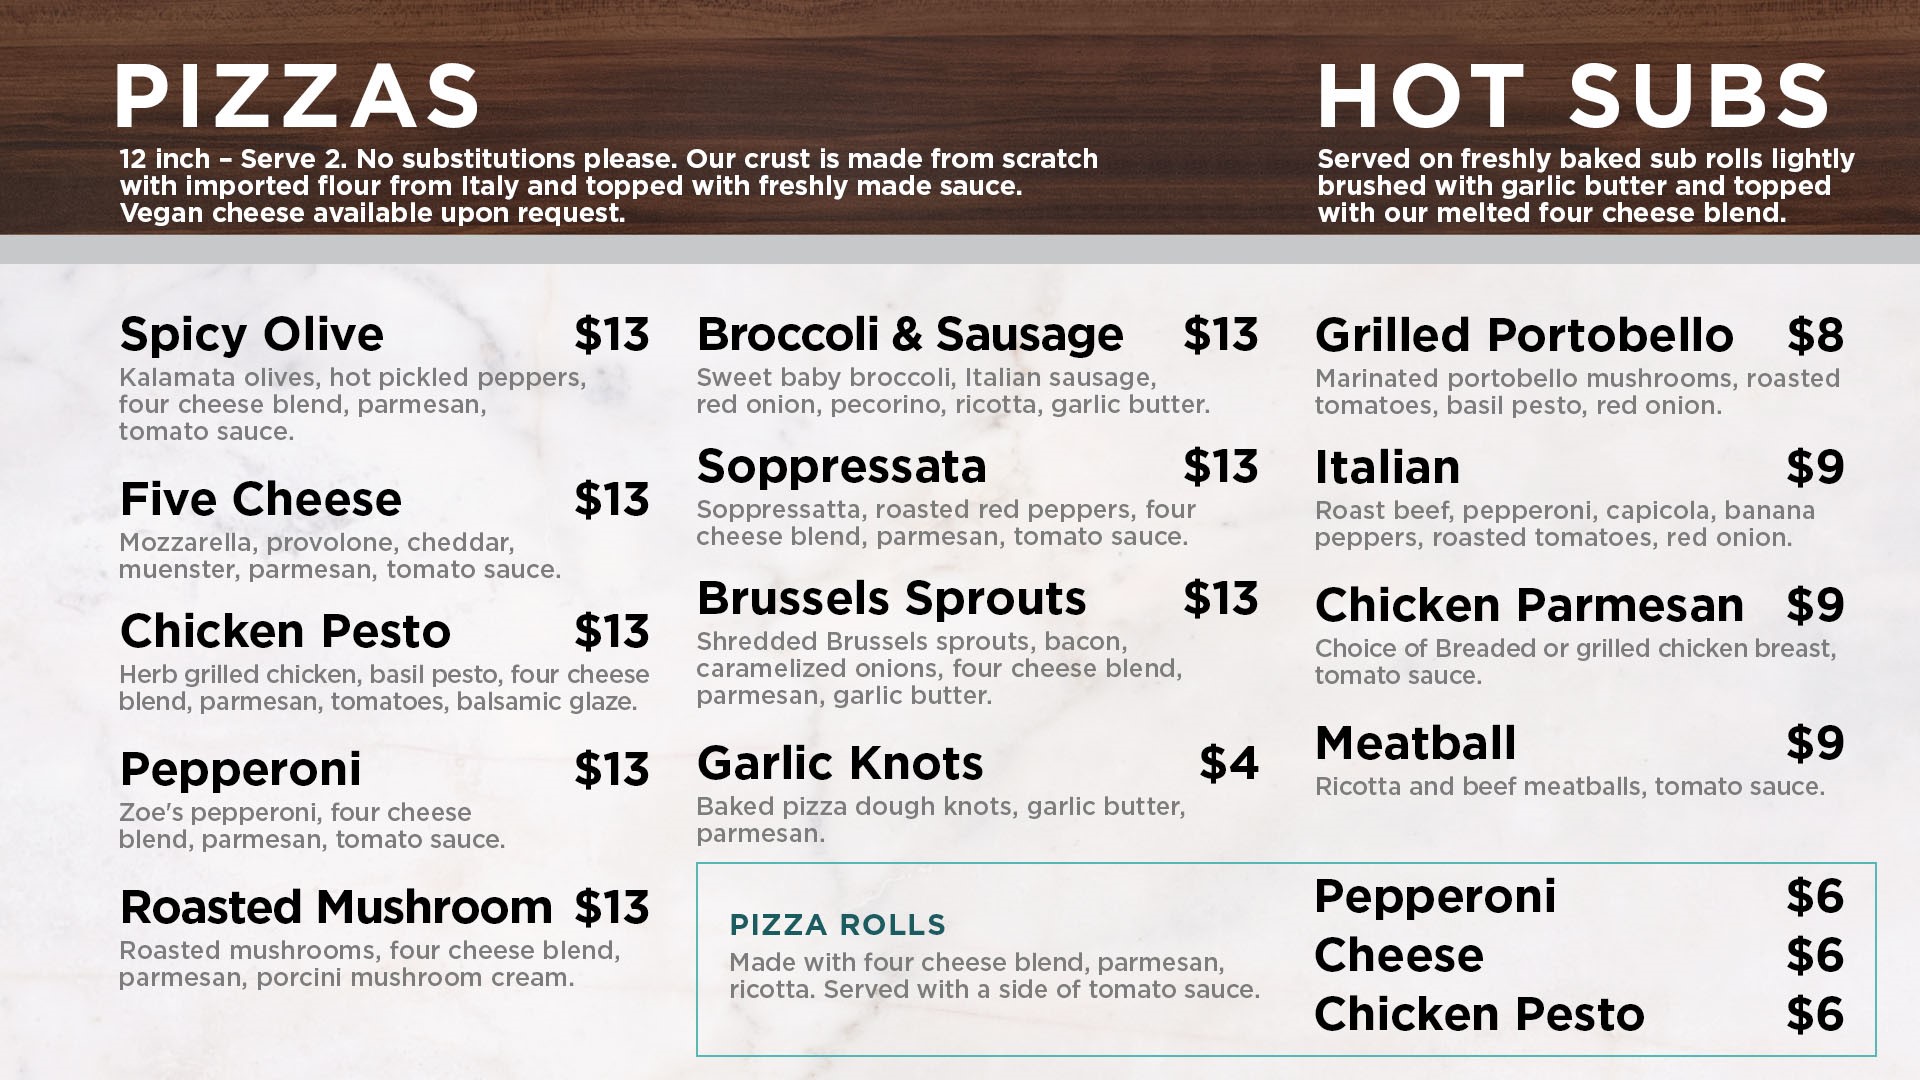 Heinen's Tasting Room Menu Featuring Pizzas and Hot Subs